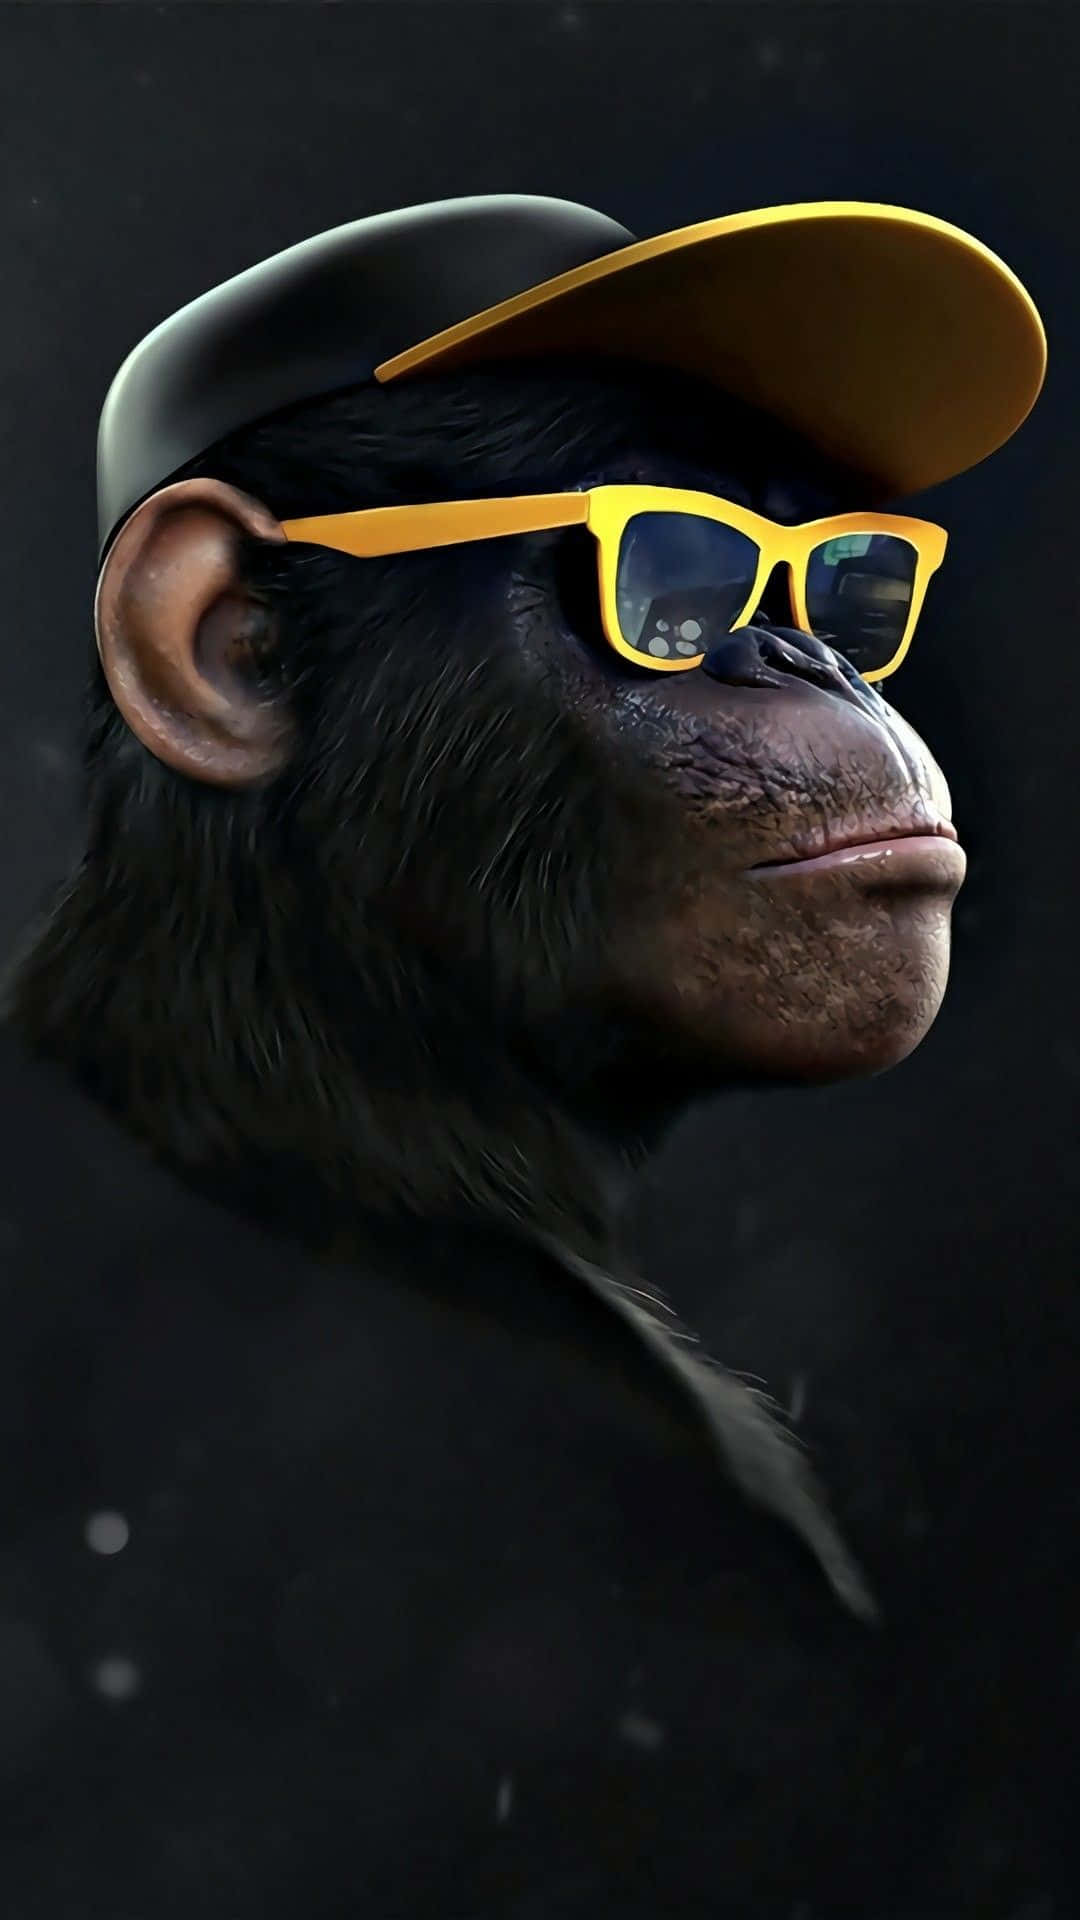 Get the latest and greatest Monkey iPhone to stay connected while on the go Wallpaper